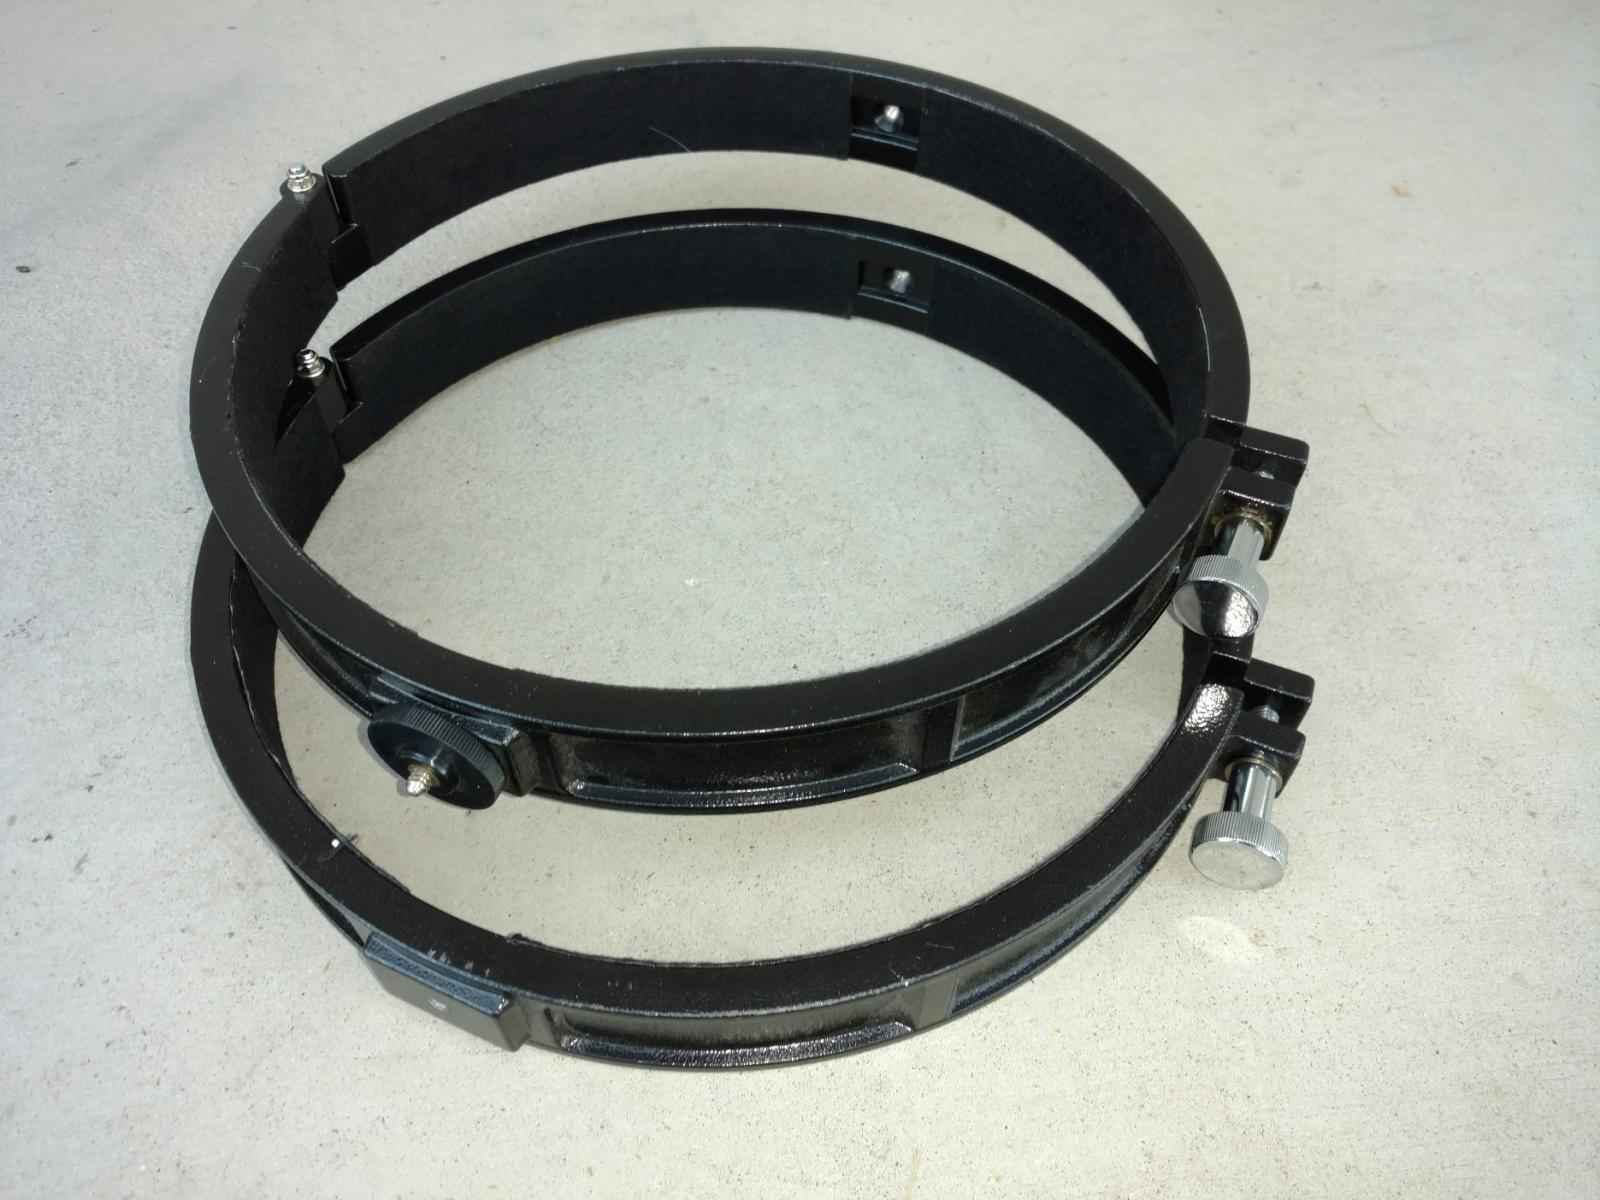 10" Orion Reflector Tube Rings - CN Classifieds - Cloudy Nights Telescope Tube Rings 220mm